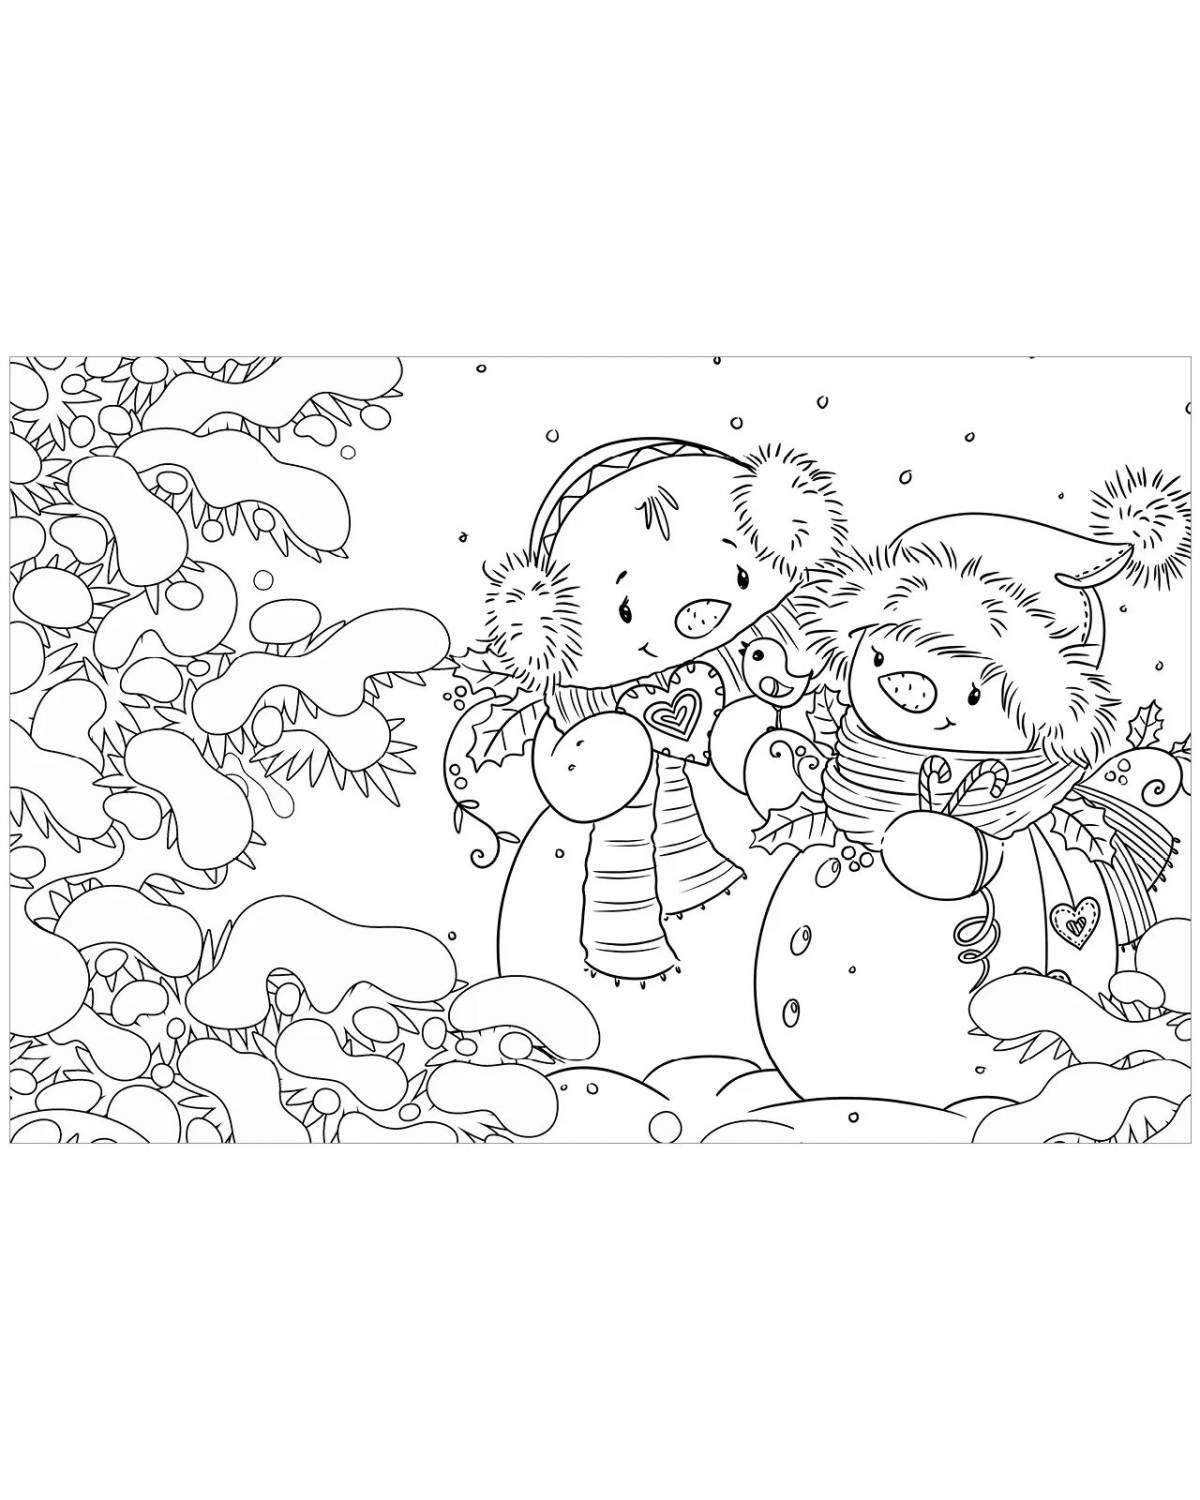 Adorable clover by number coloring book